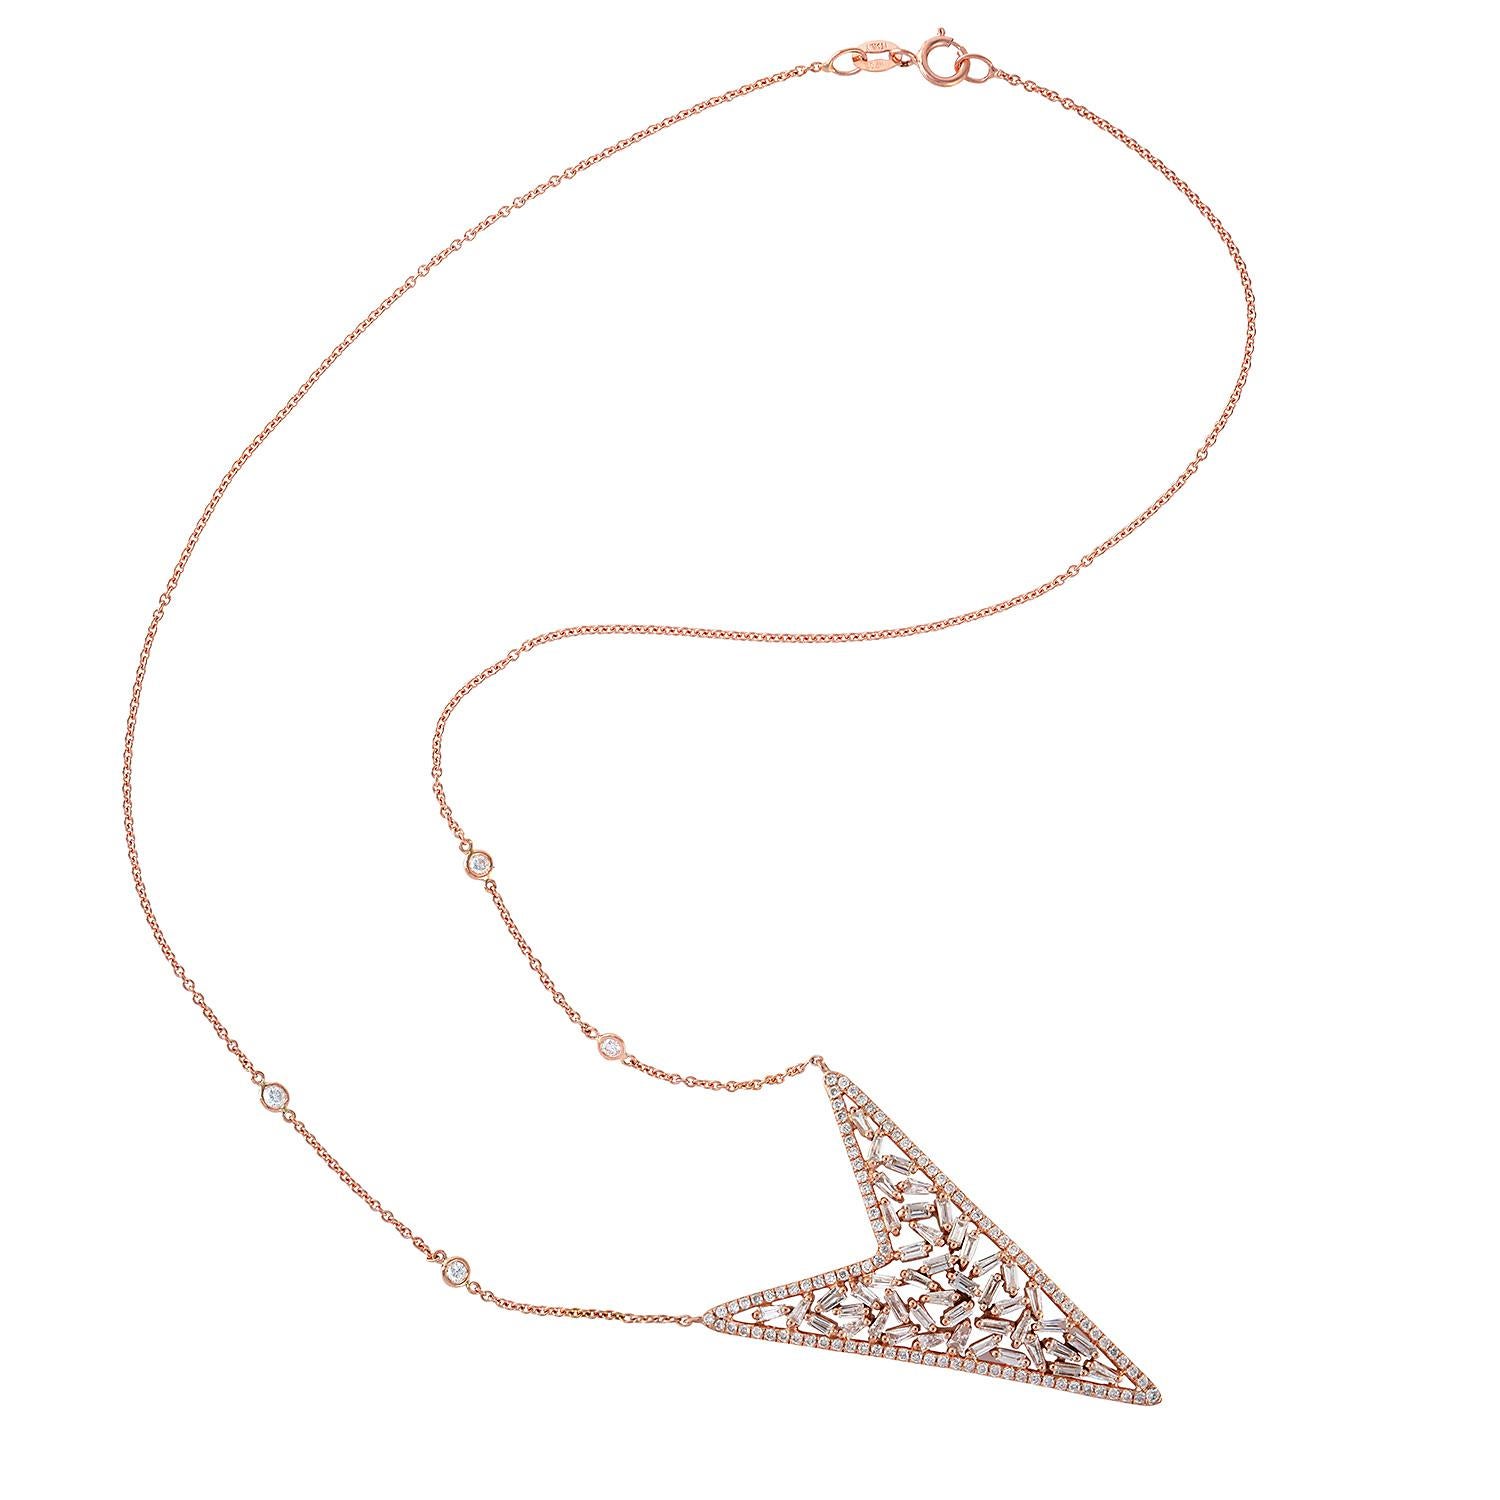 Arrow Shaped Baguette Diamond Pendant Necklace Made in 18k Rose Gold In New Condition For Sale In New York, NY